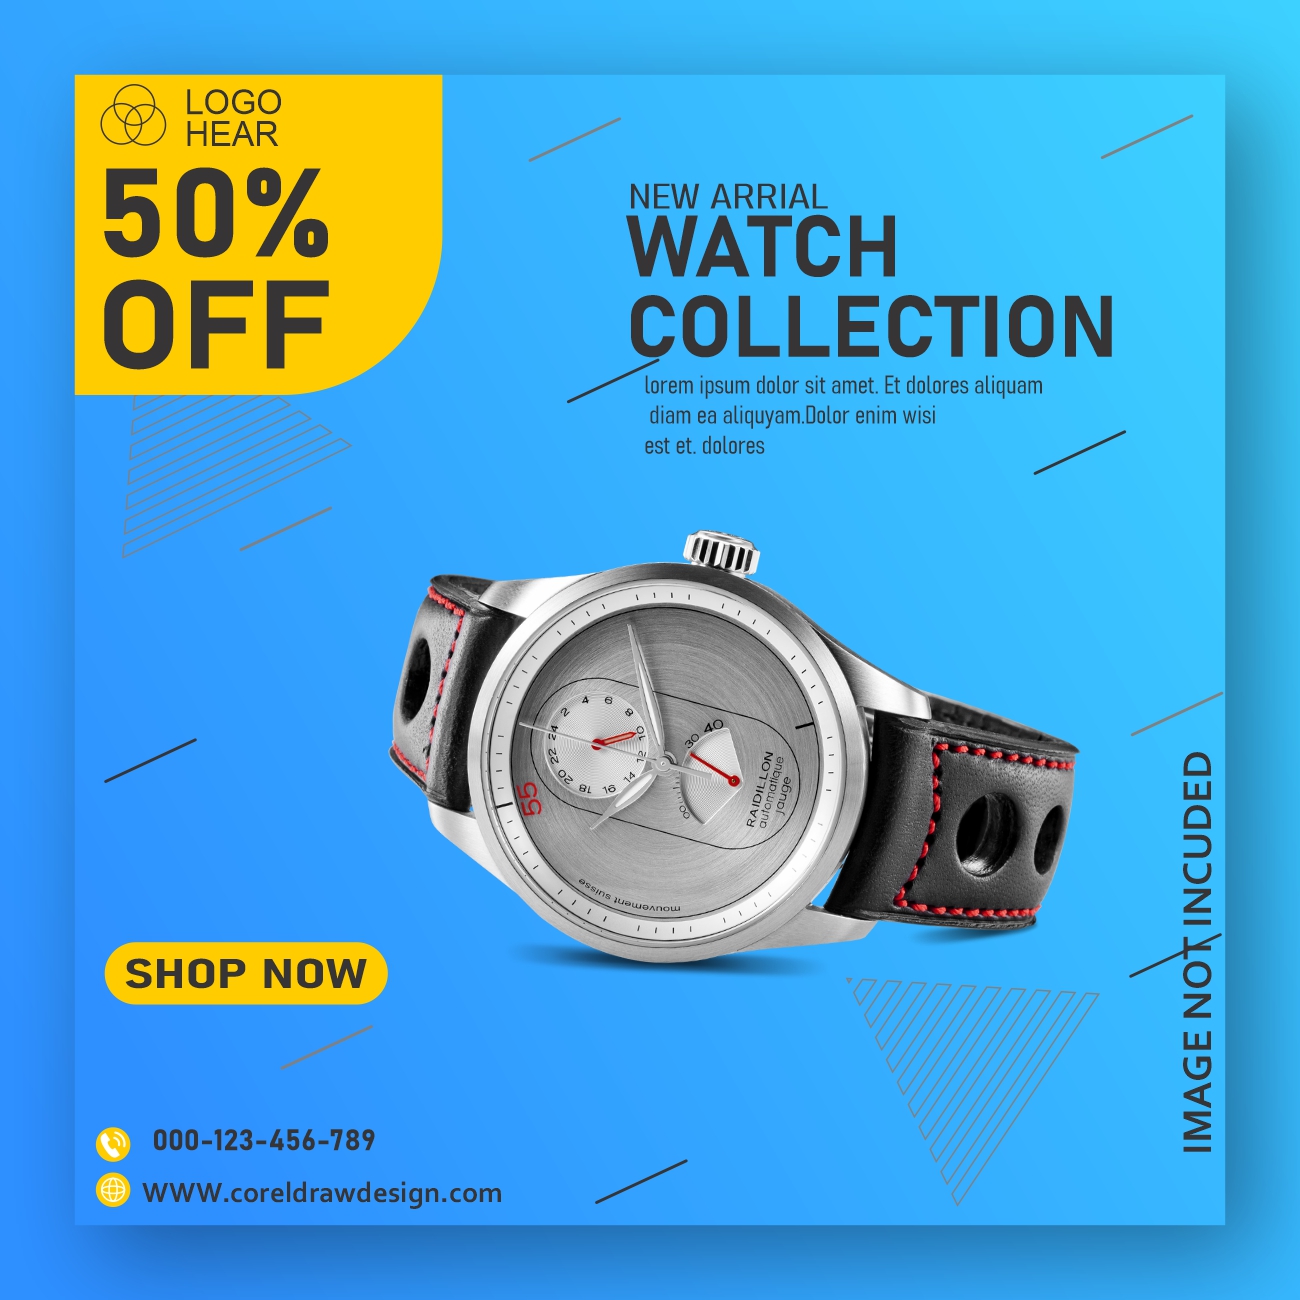 Watch Sale Flyer Design Template in Word, PSD, Publisher